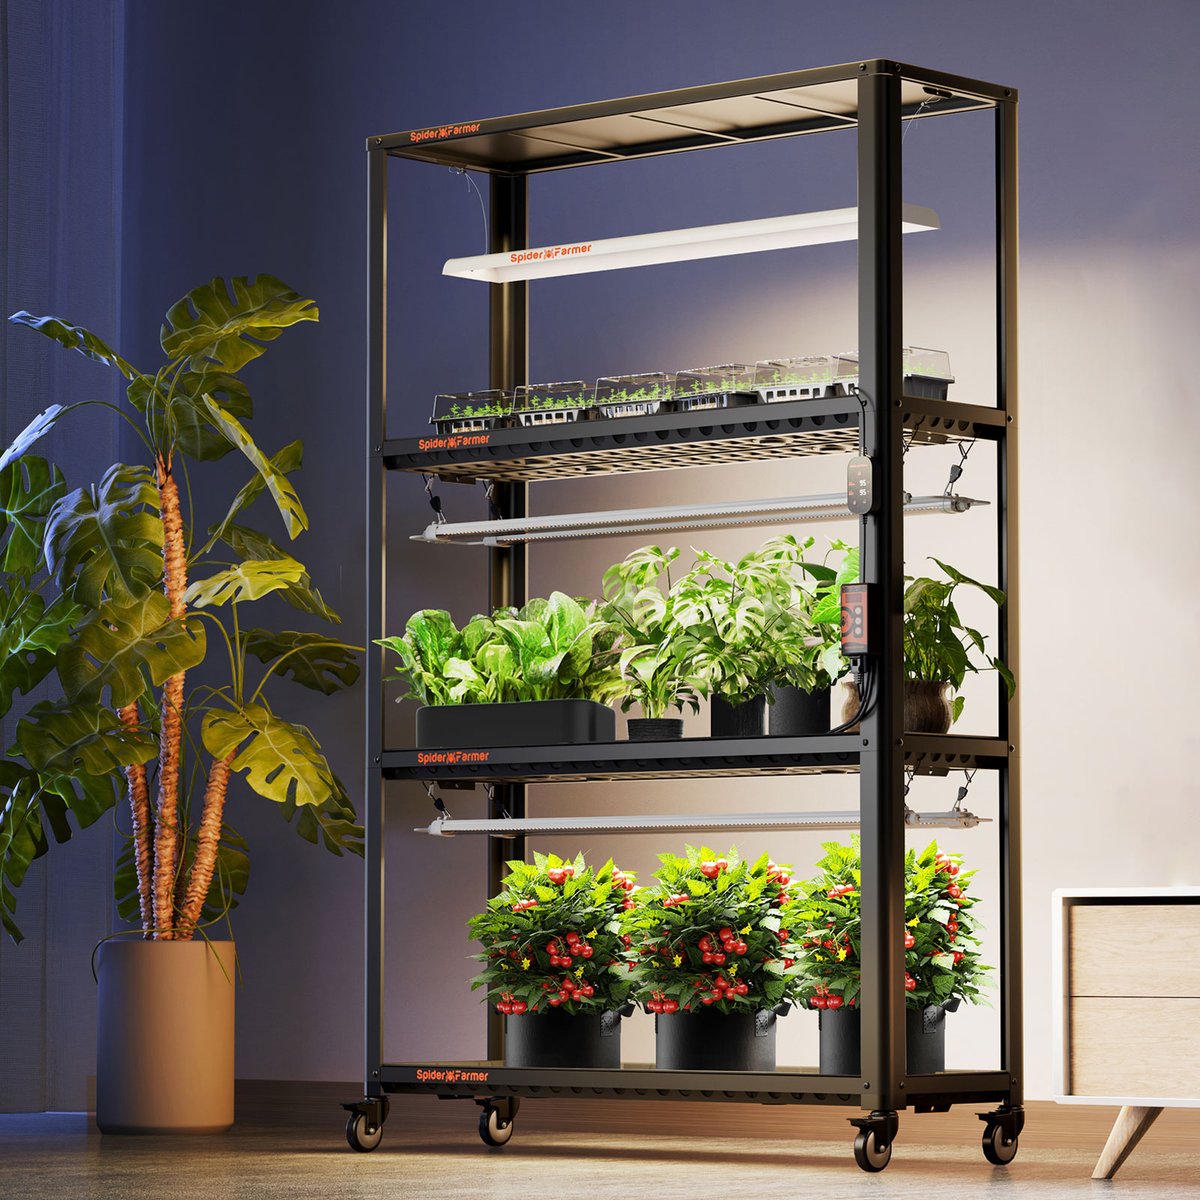 💡Our glow80 is a full spectrum efficient output with low energy consumption，there are 476 lamp beads in total, and the power consumption is only 80W. 🙌With SF600, what kind of vegetables you can grow? spider-farmer.com/?s=glow80&post… #SpiderFarmer #glow80 #SF600 #GIVEAWAY